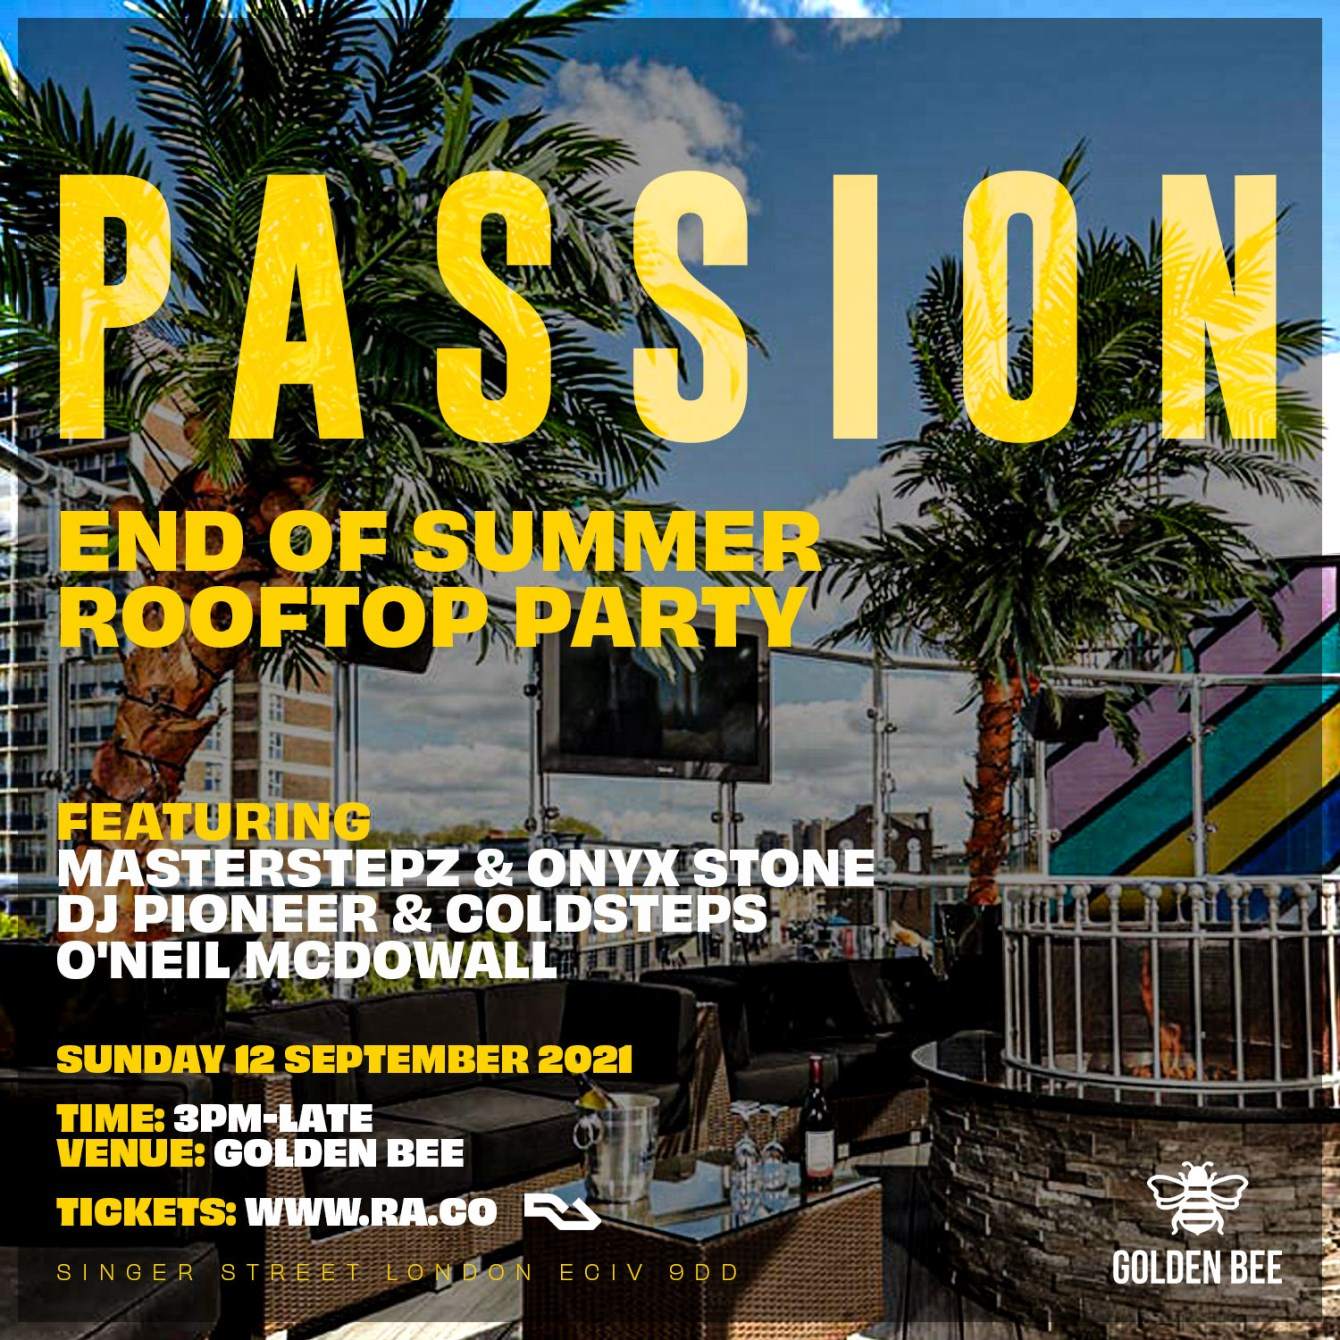 Passion - End Of Summer Rooftop Party - フライヤー裏